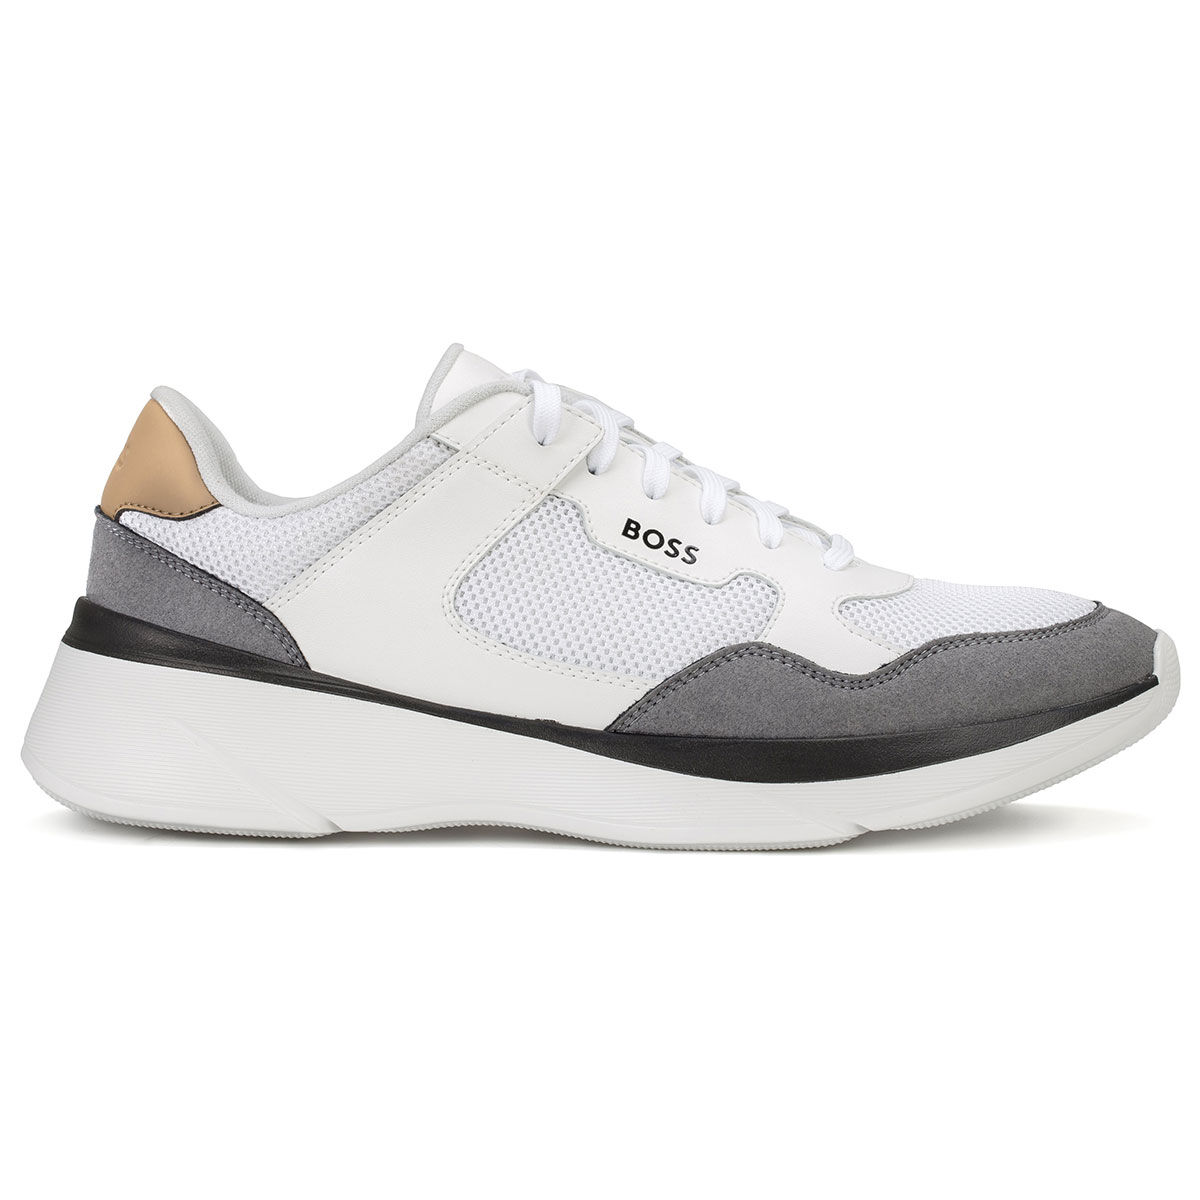 Hugo Boss Mens White and Grey Lightweight Dean Running Style Golf Trainers, Size: 7 | American Golf